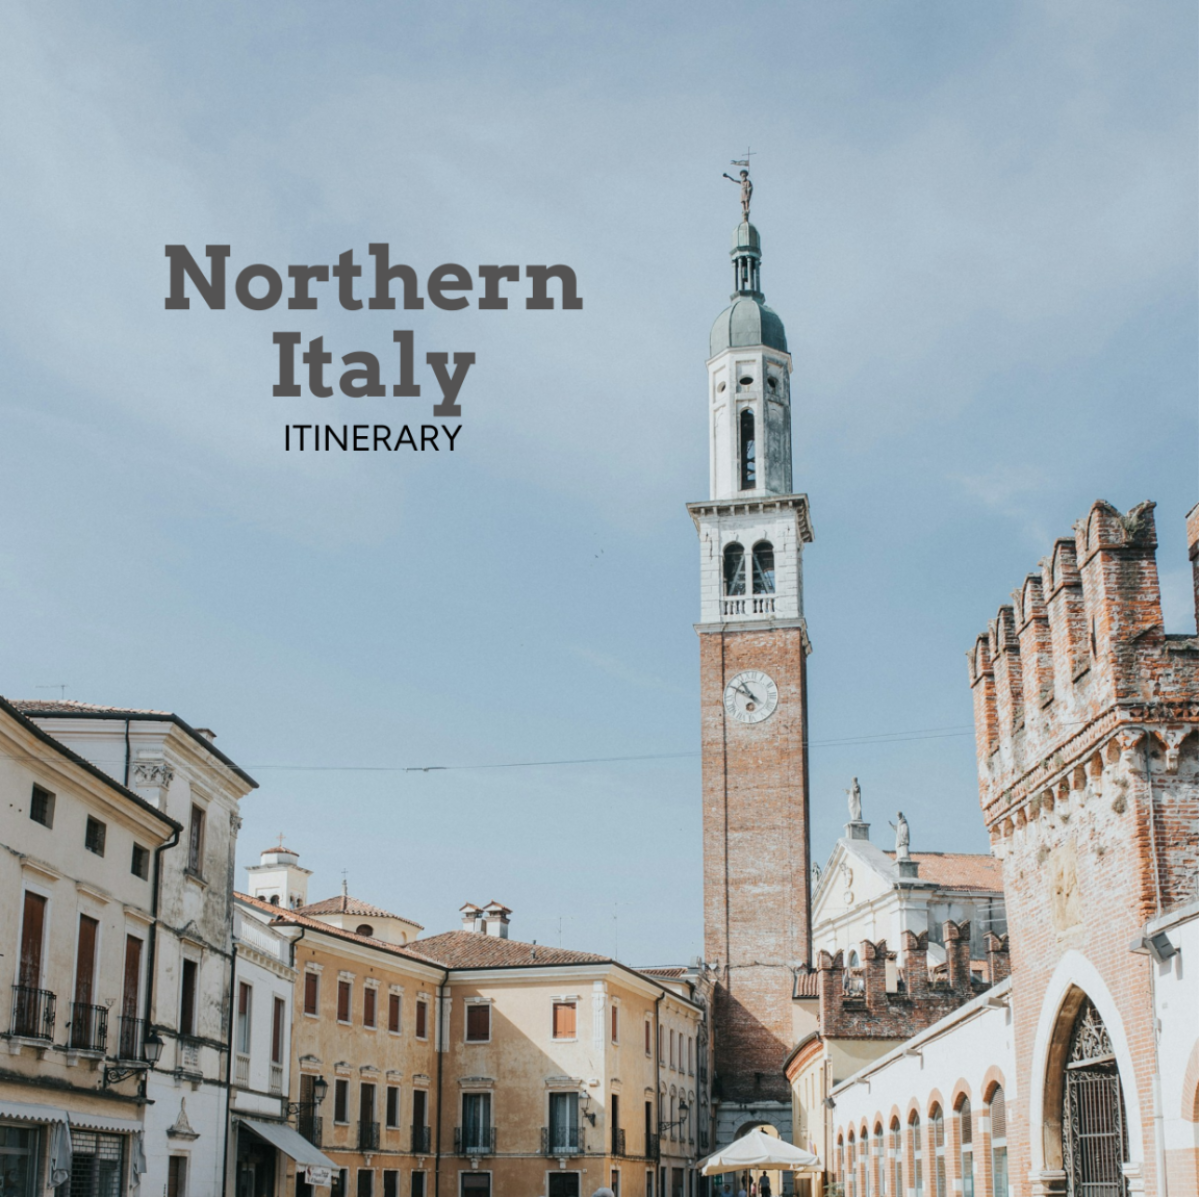 Northern Italy Itinerary Template